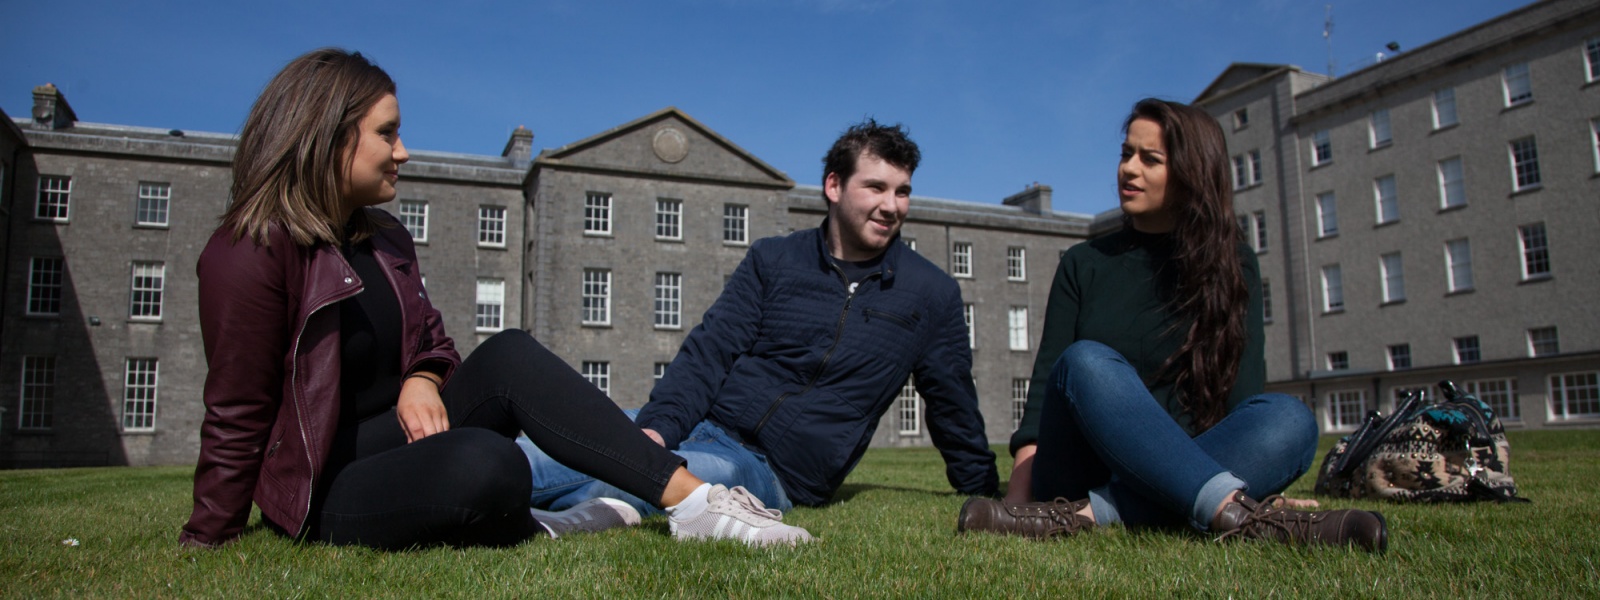 BA in Education, Business Studies and Accounting, MIC Thurles